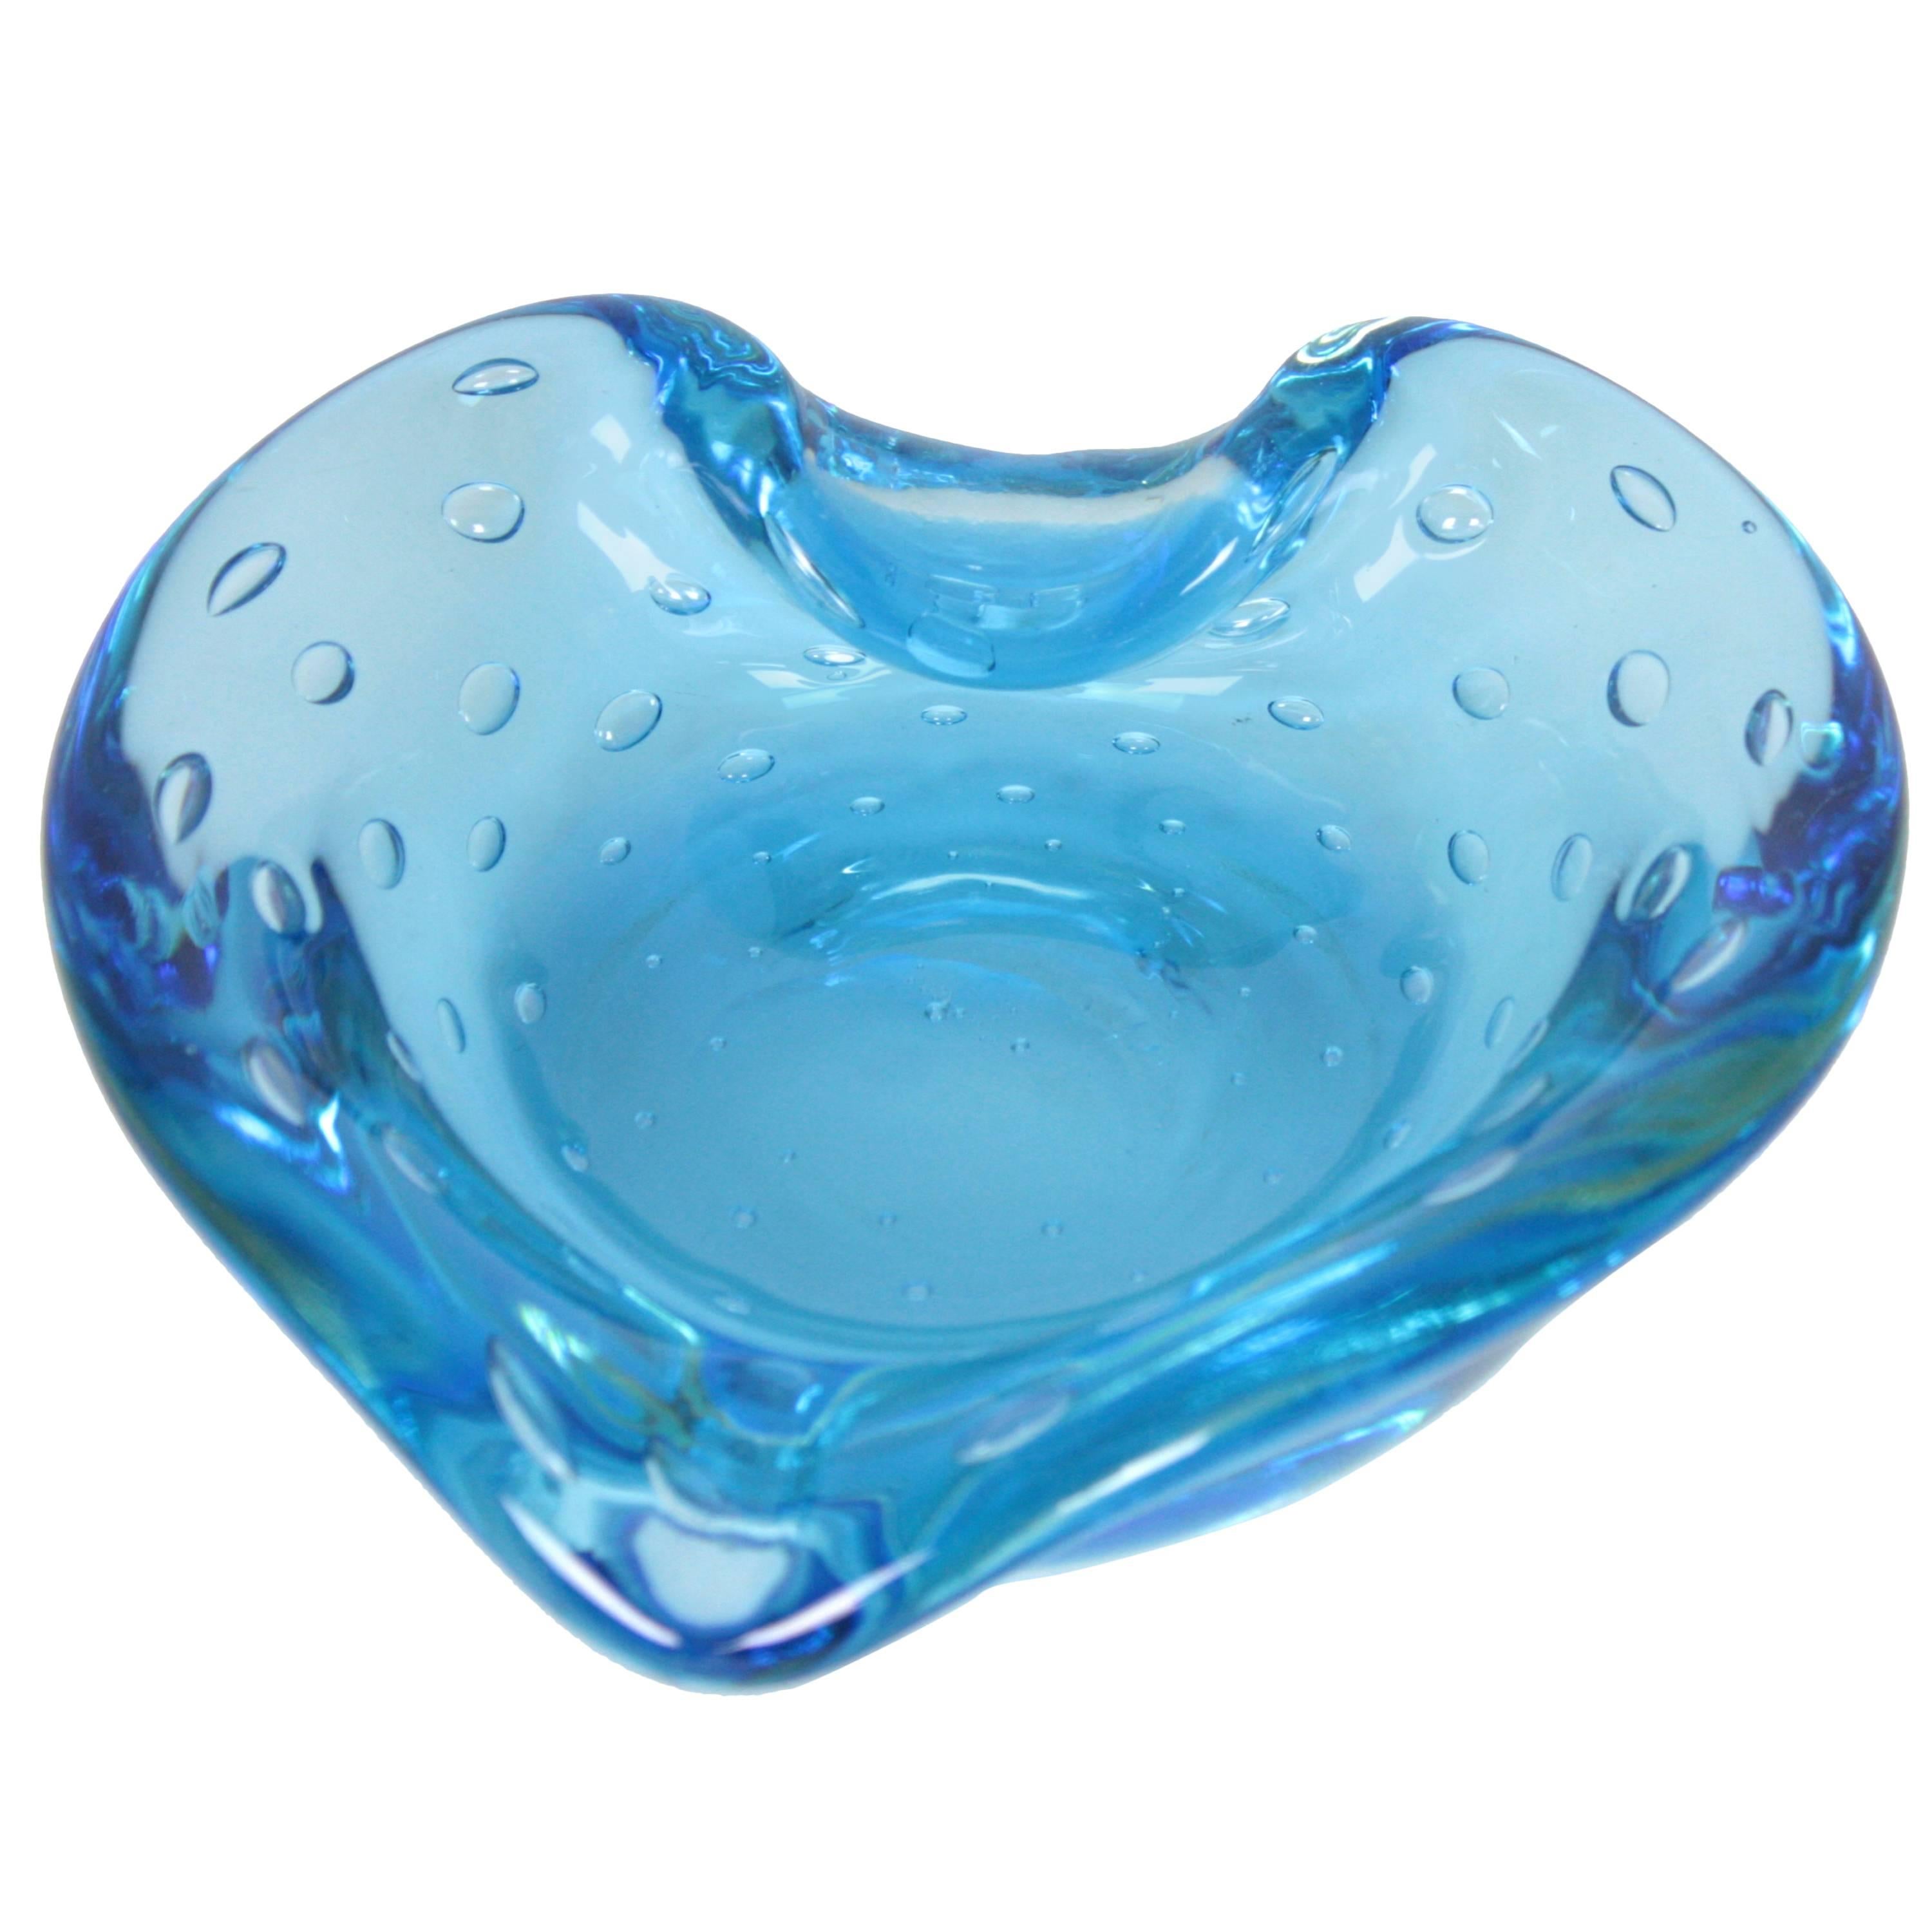 Controlled Bubbles Translucid Sky Blue Murano Glass Heart Bowl or Ashtray